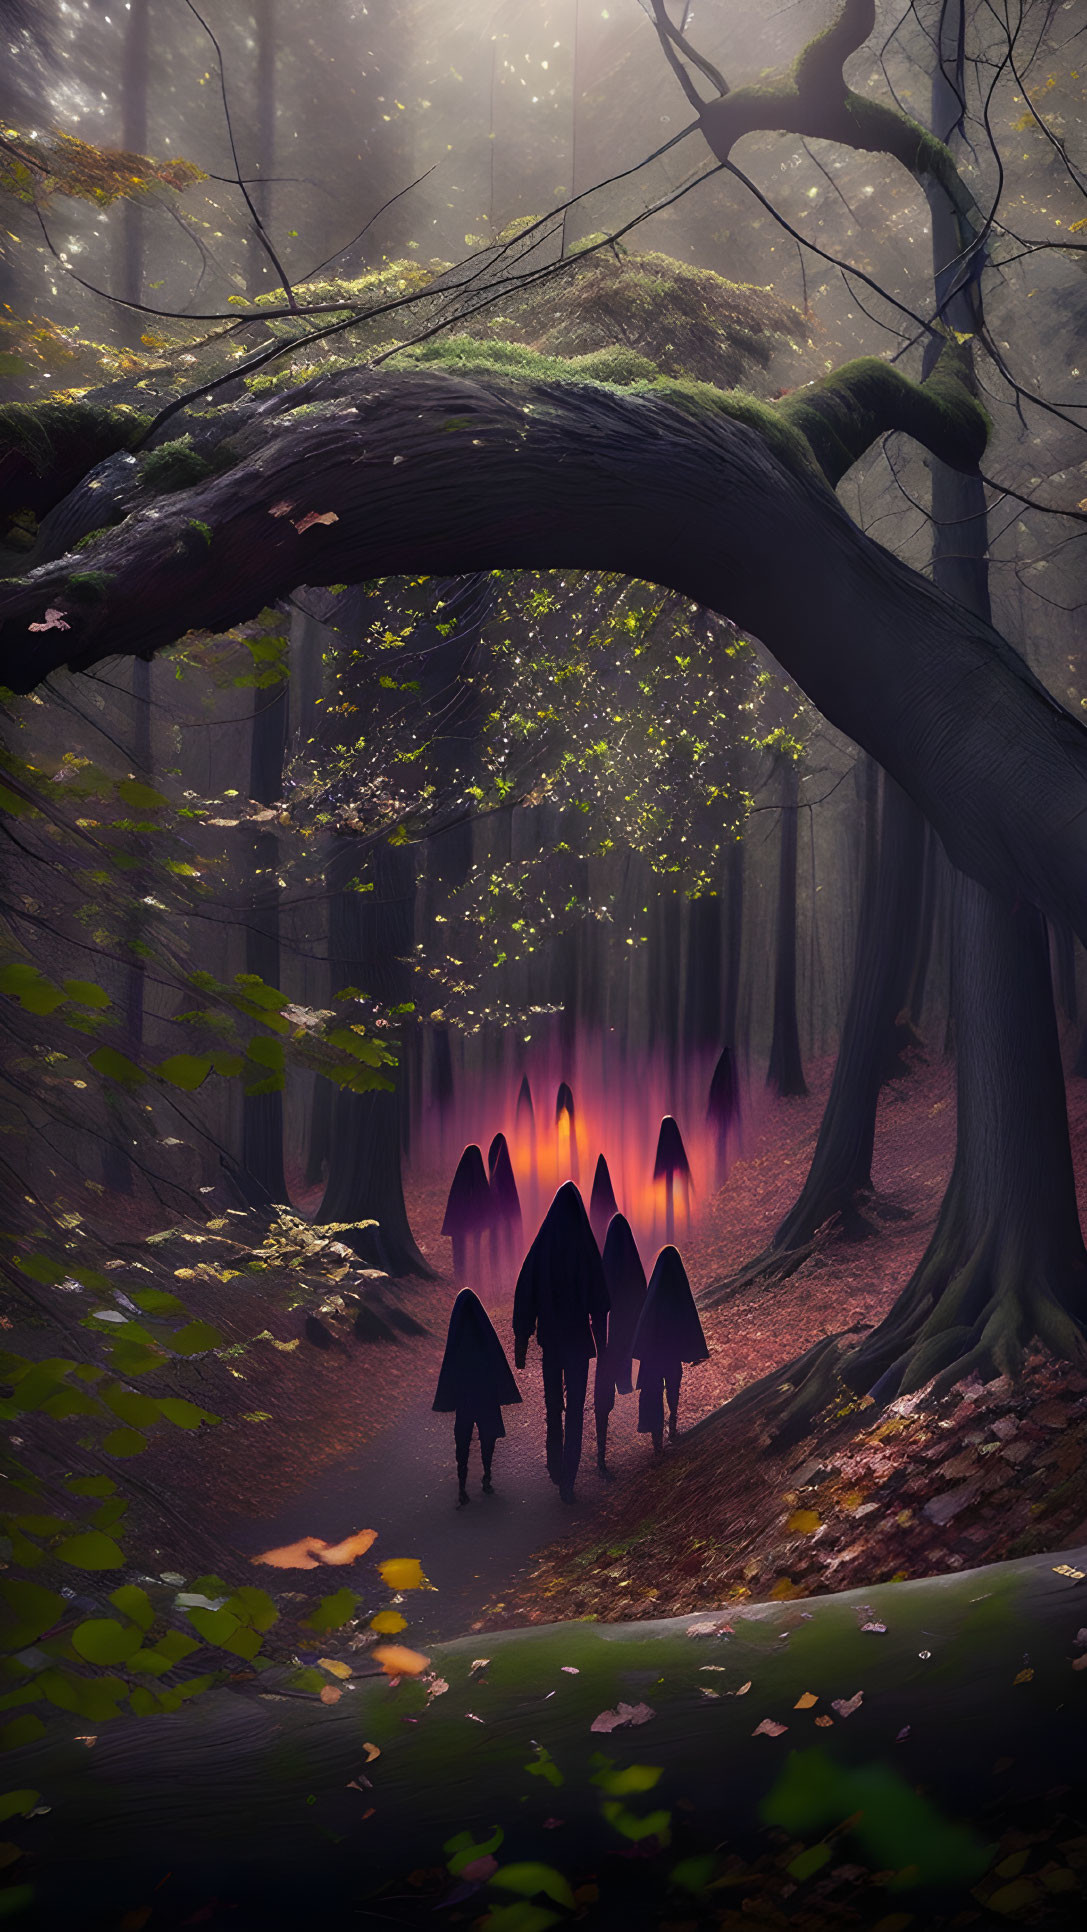 Mystical forest with cloaked figures under curved tree trunk amid purple lights and mist